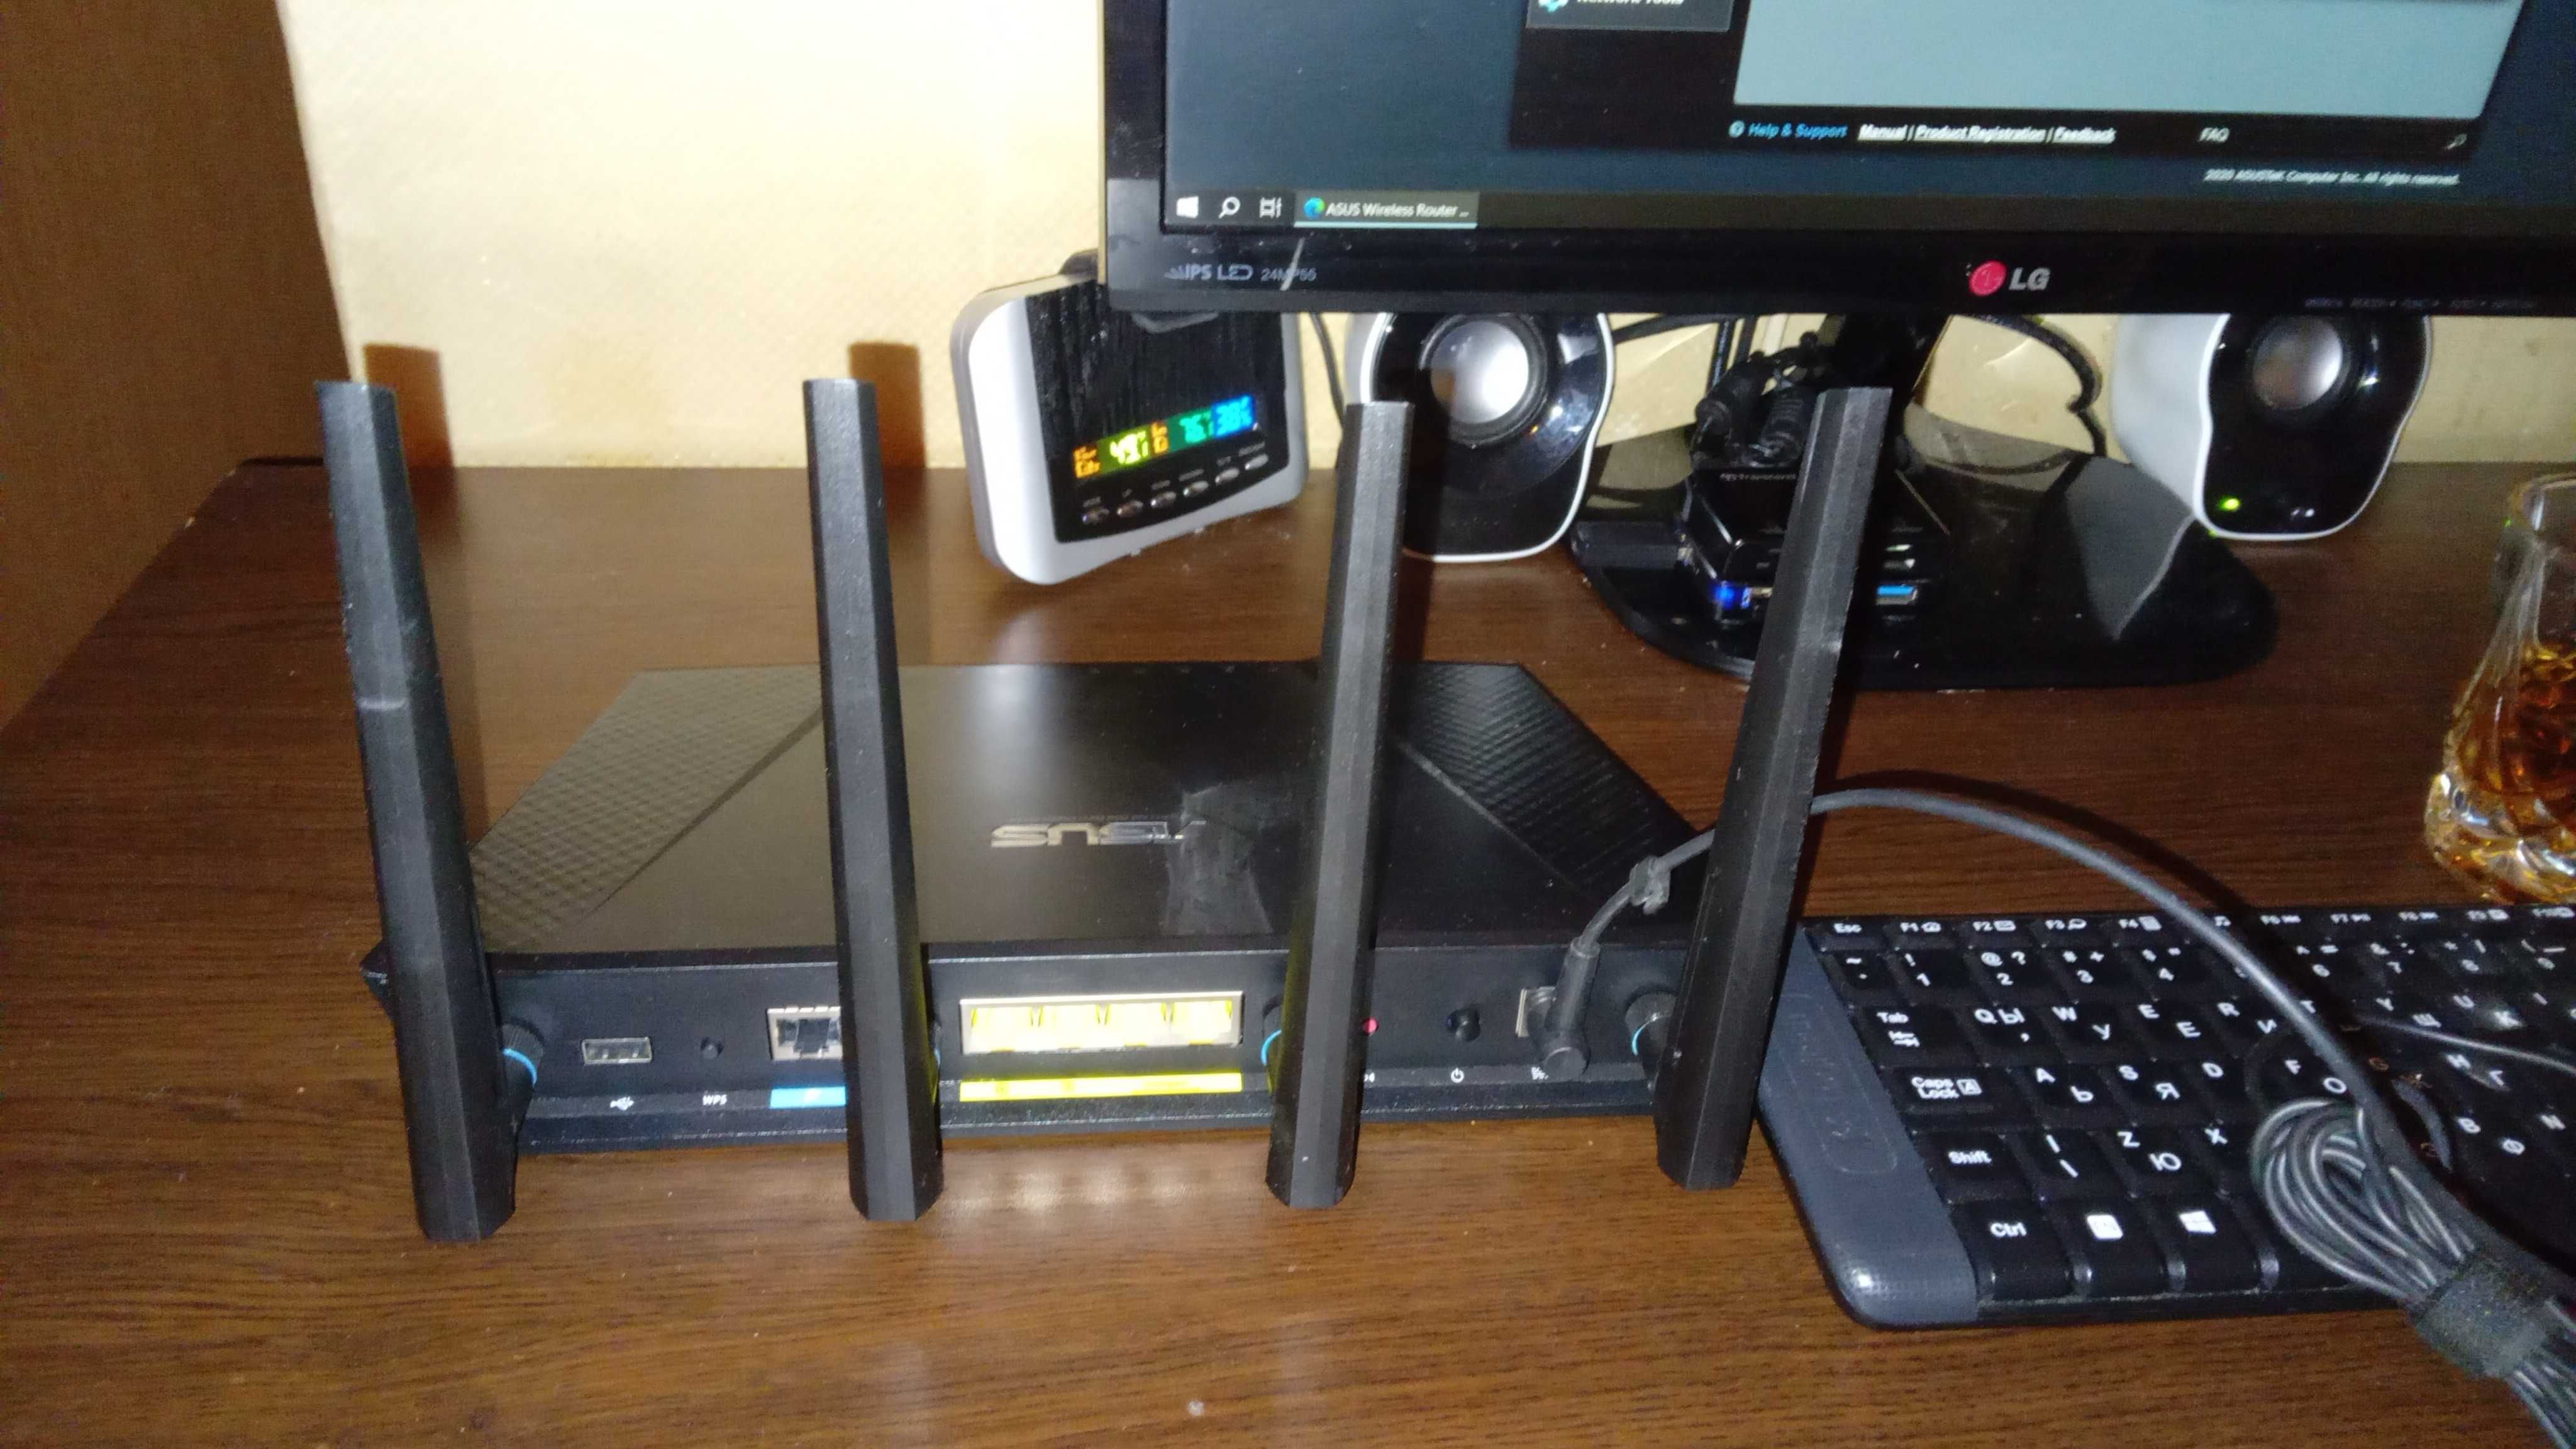 Asus RT-AC87U router